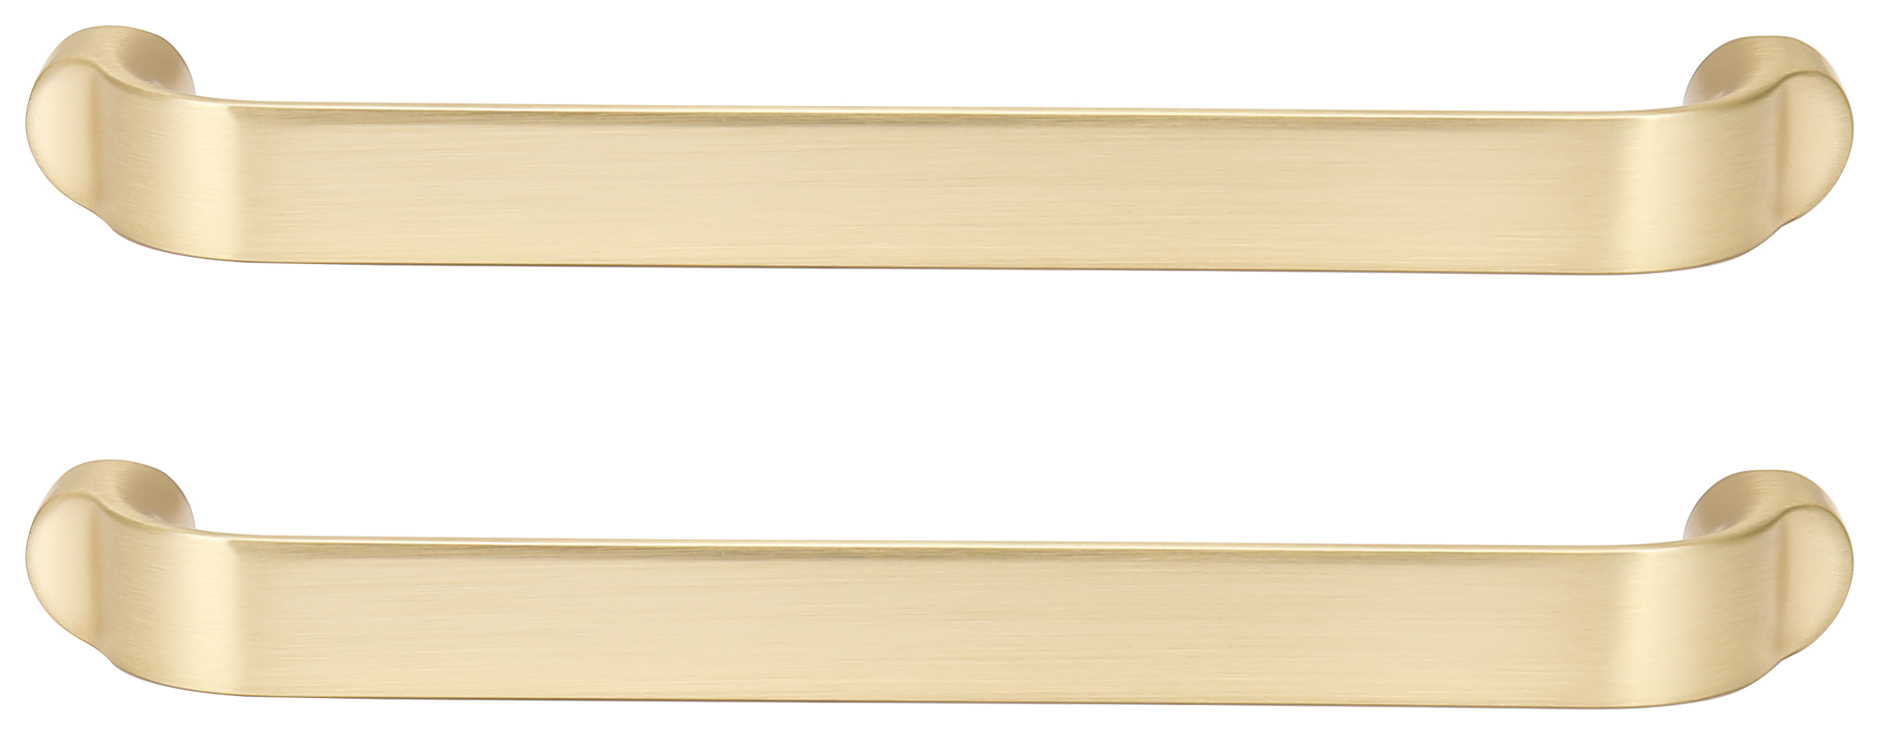 Image of Straight Cabinet Handle Satin Brass 140mm - Pack of 2